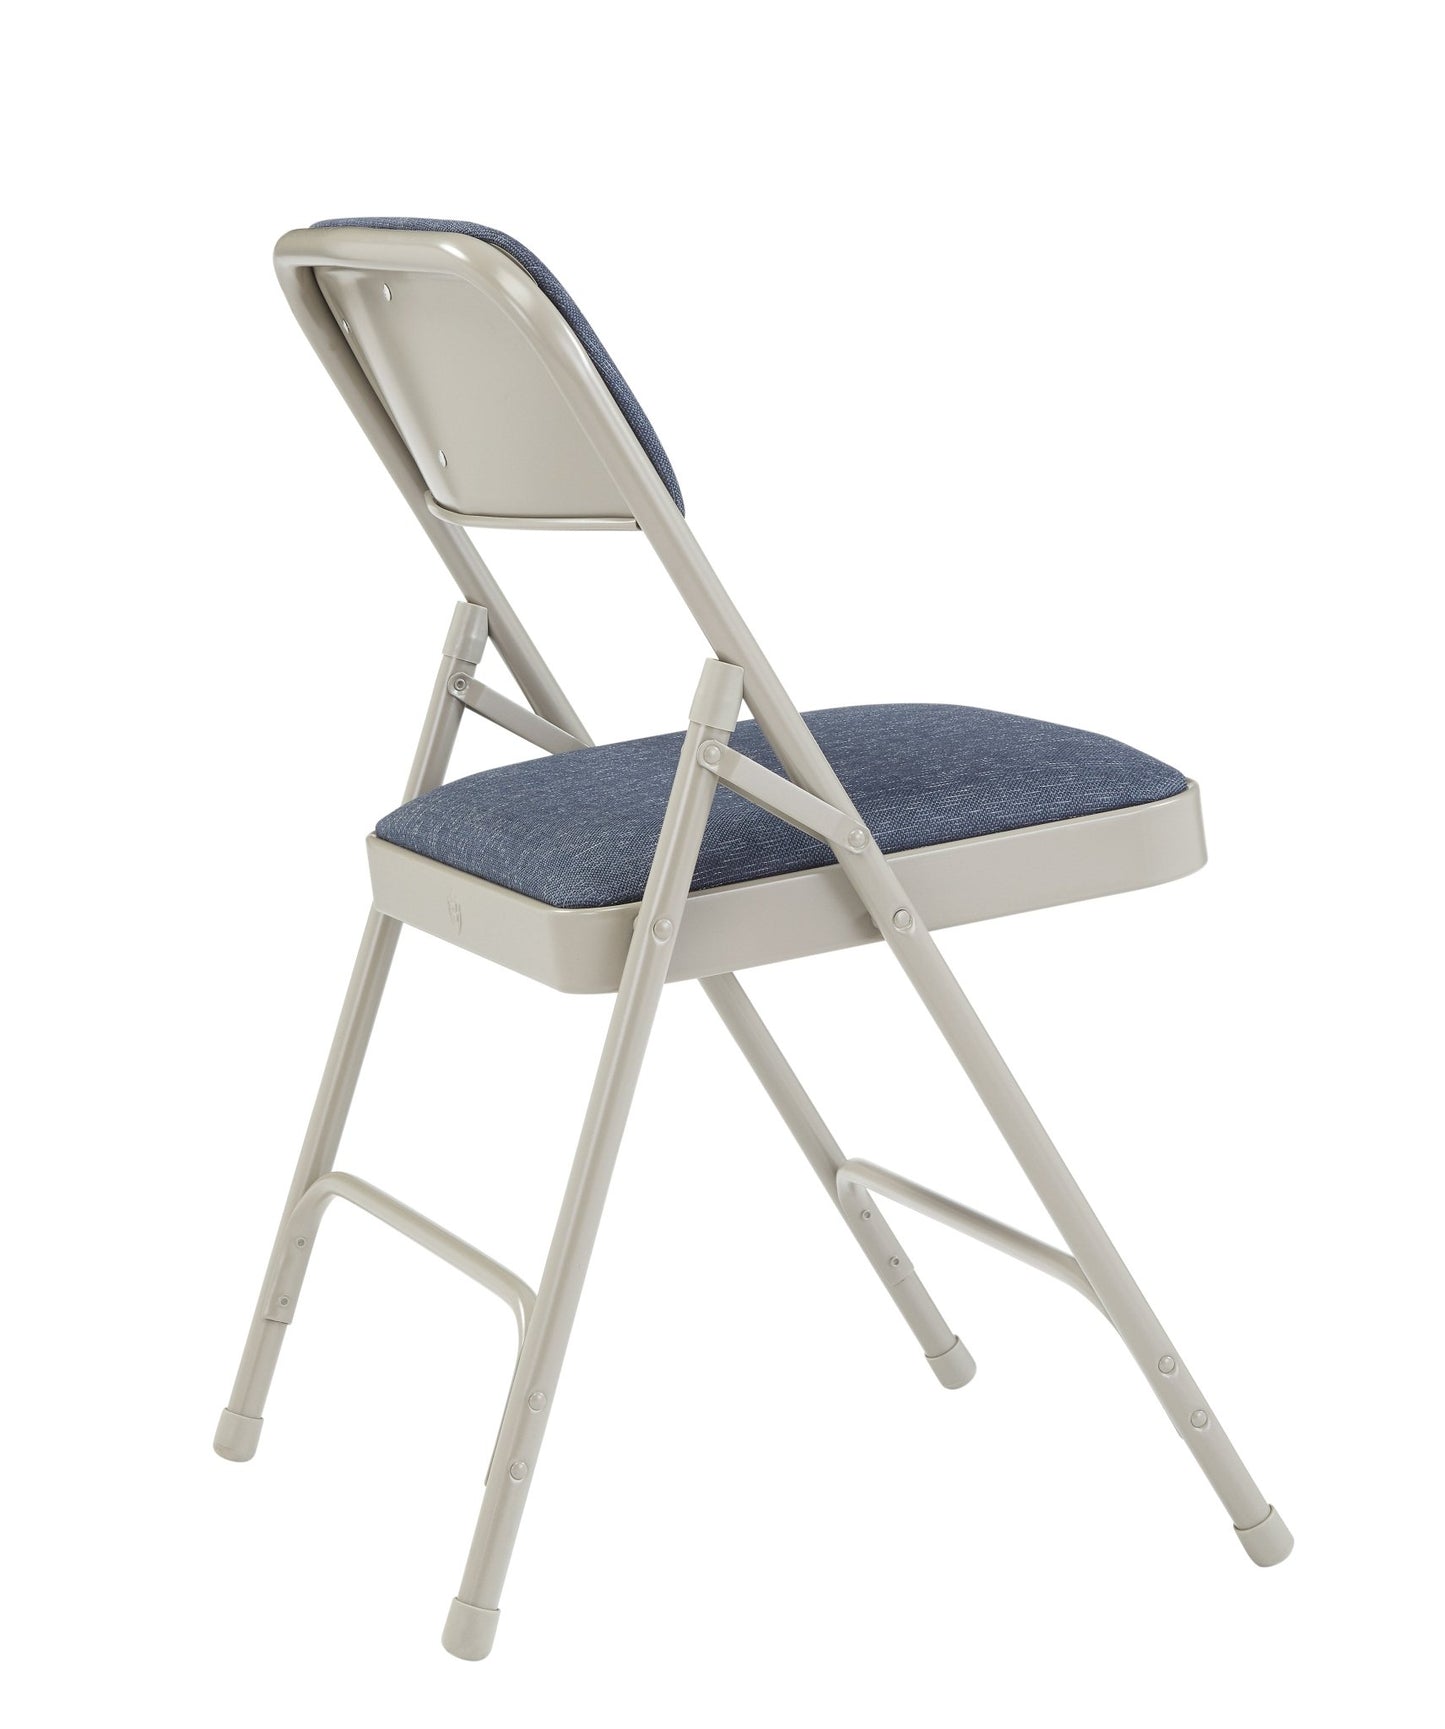 NPS 2200 Series Fabric Upholstered Premium Folding Chair (National Public Seating NPS-2200) - SchoolOutlet